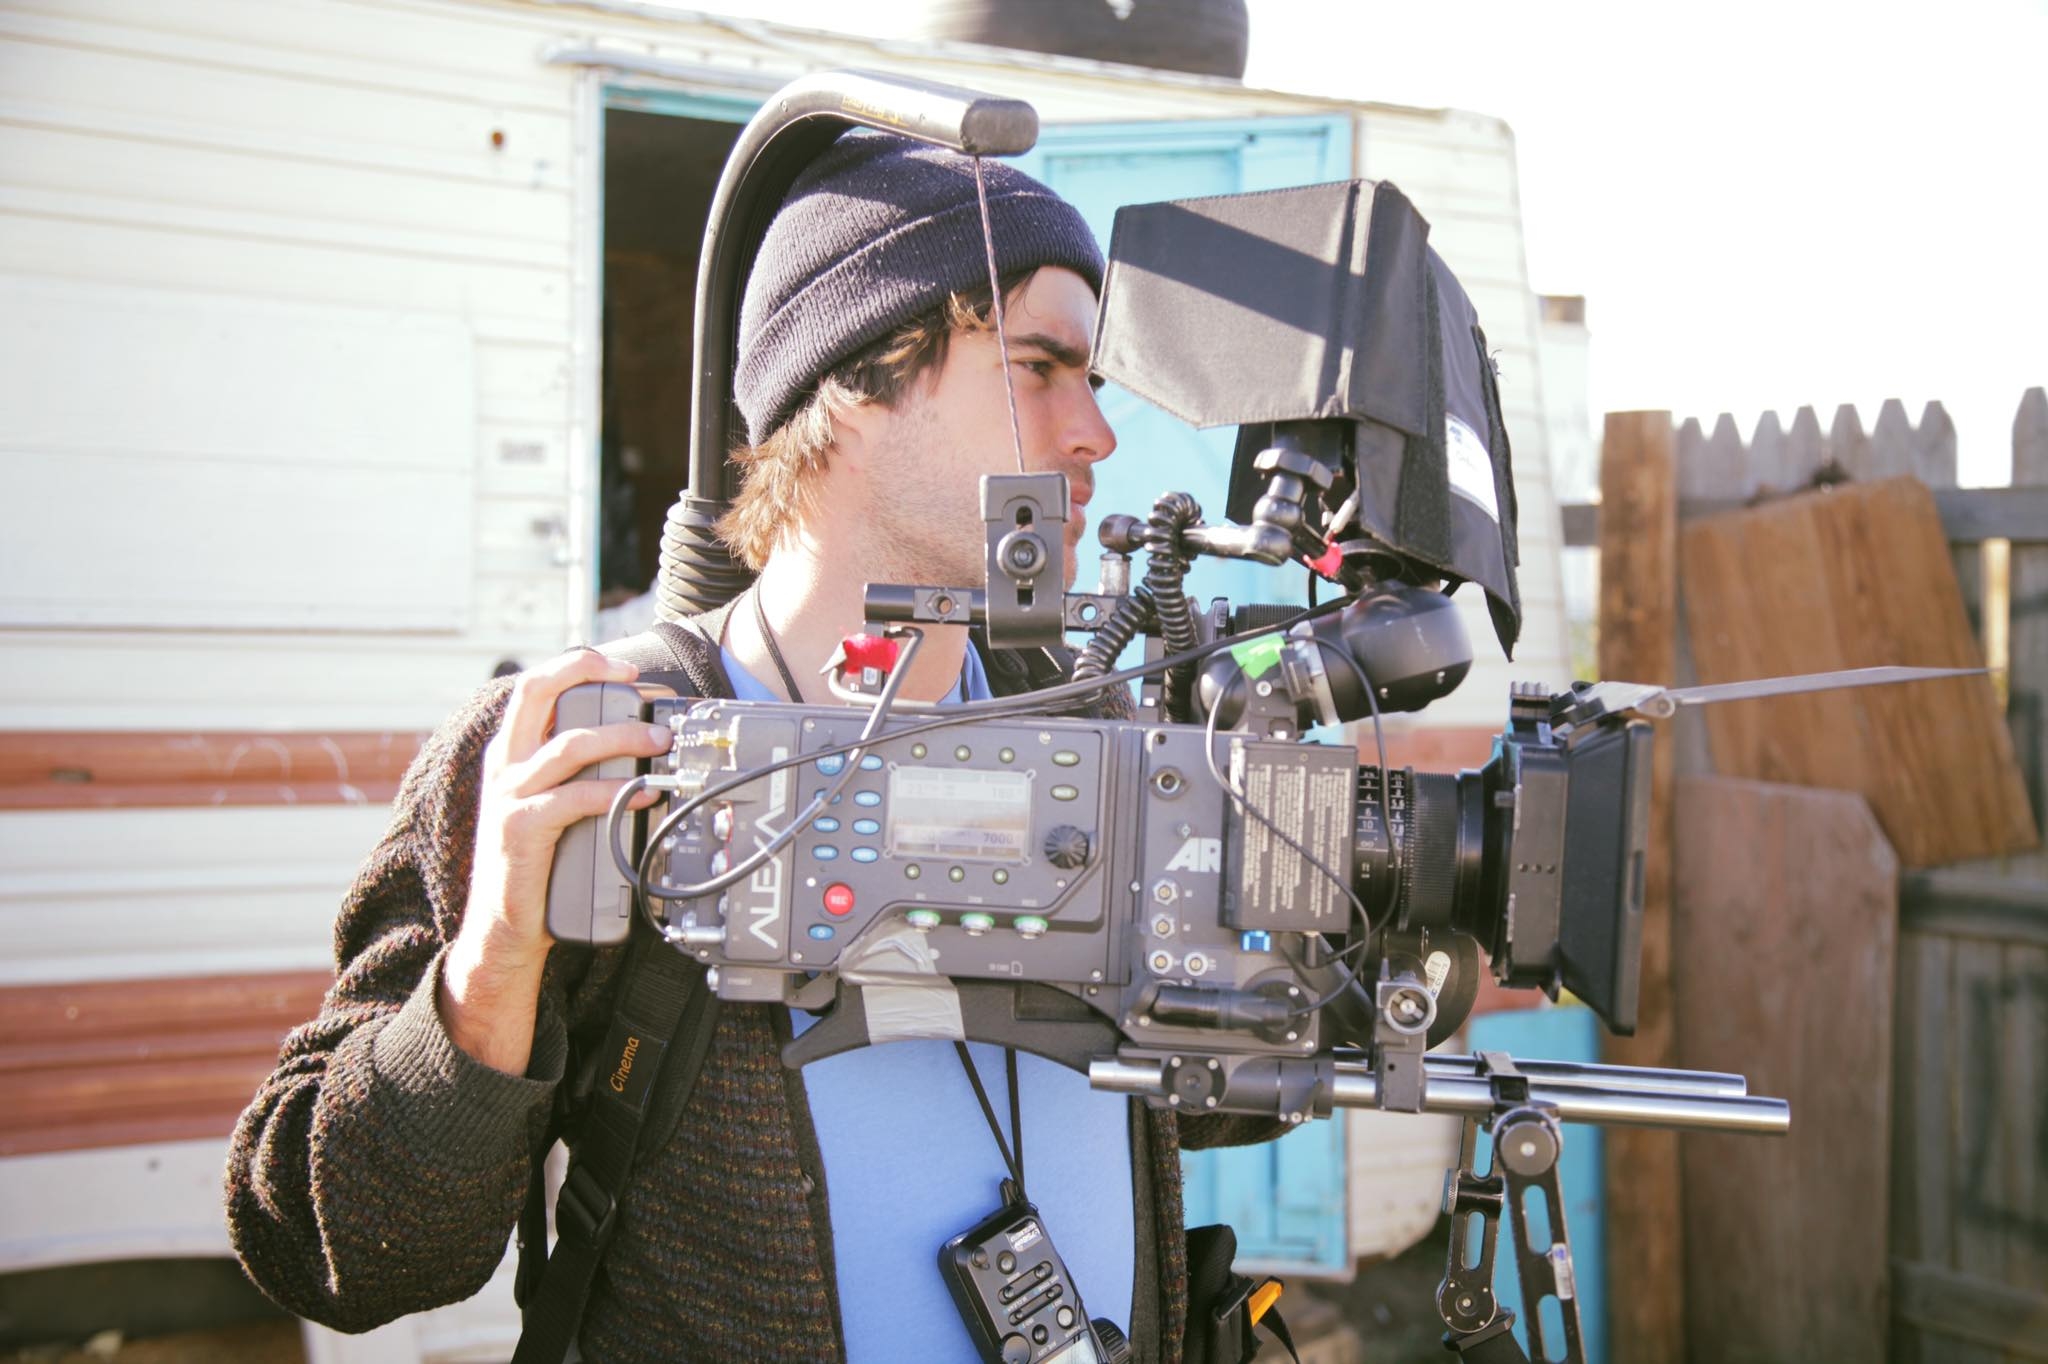 An image of a young man handling a camera rig.